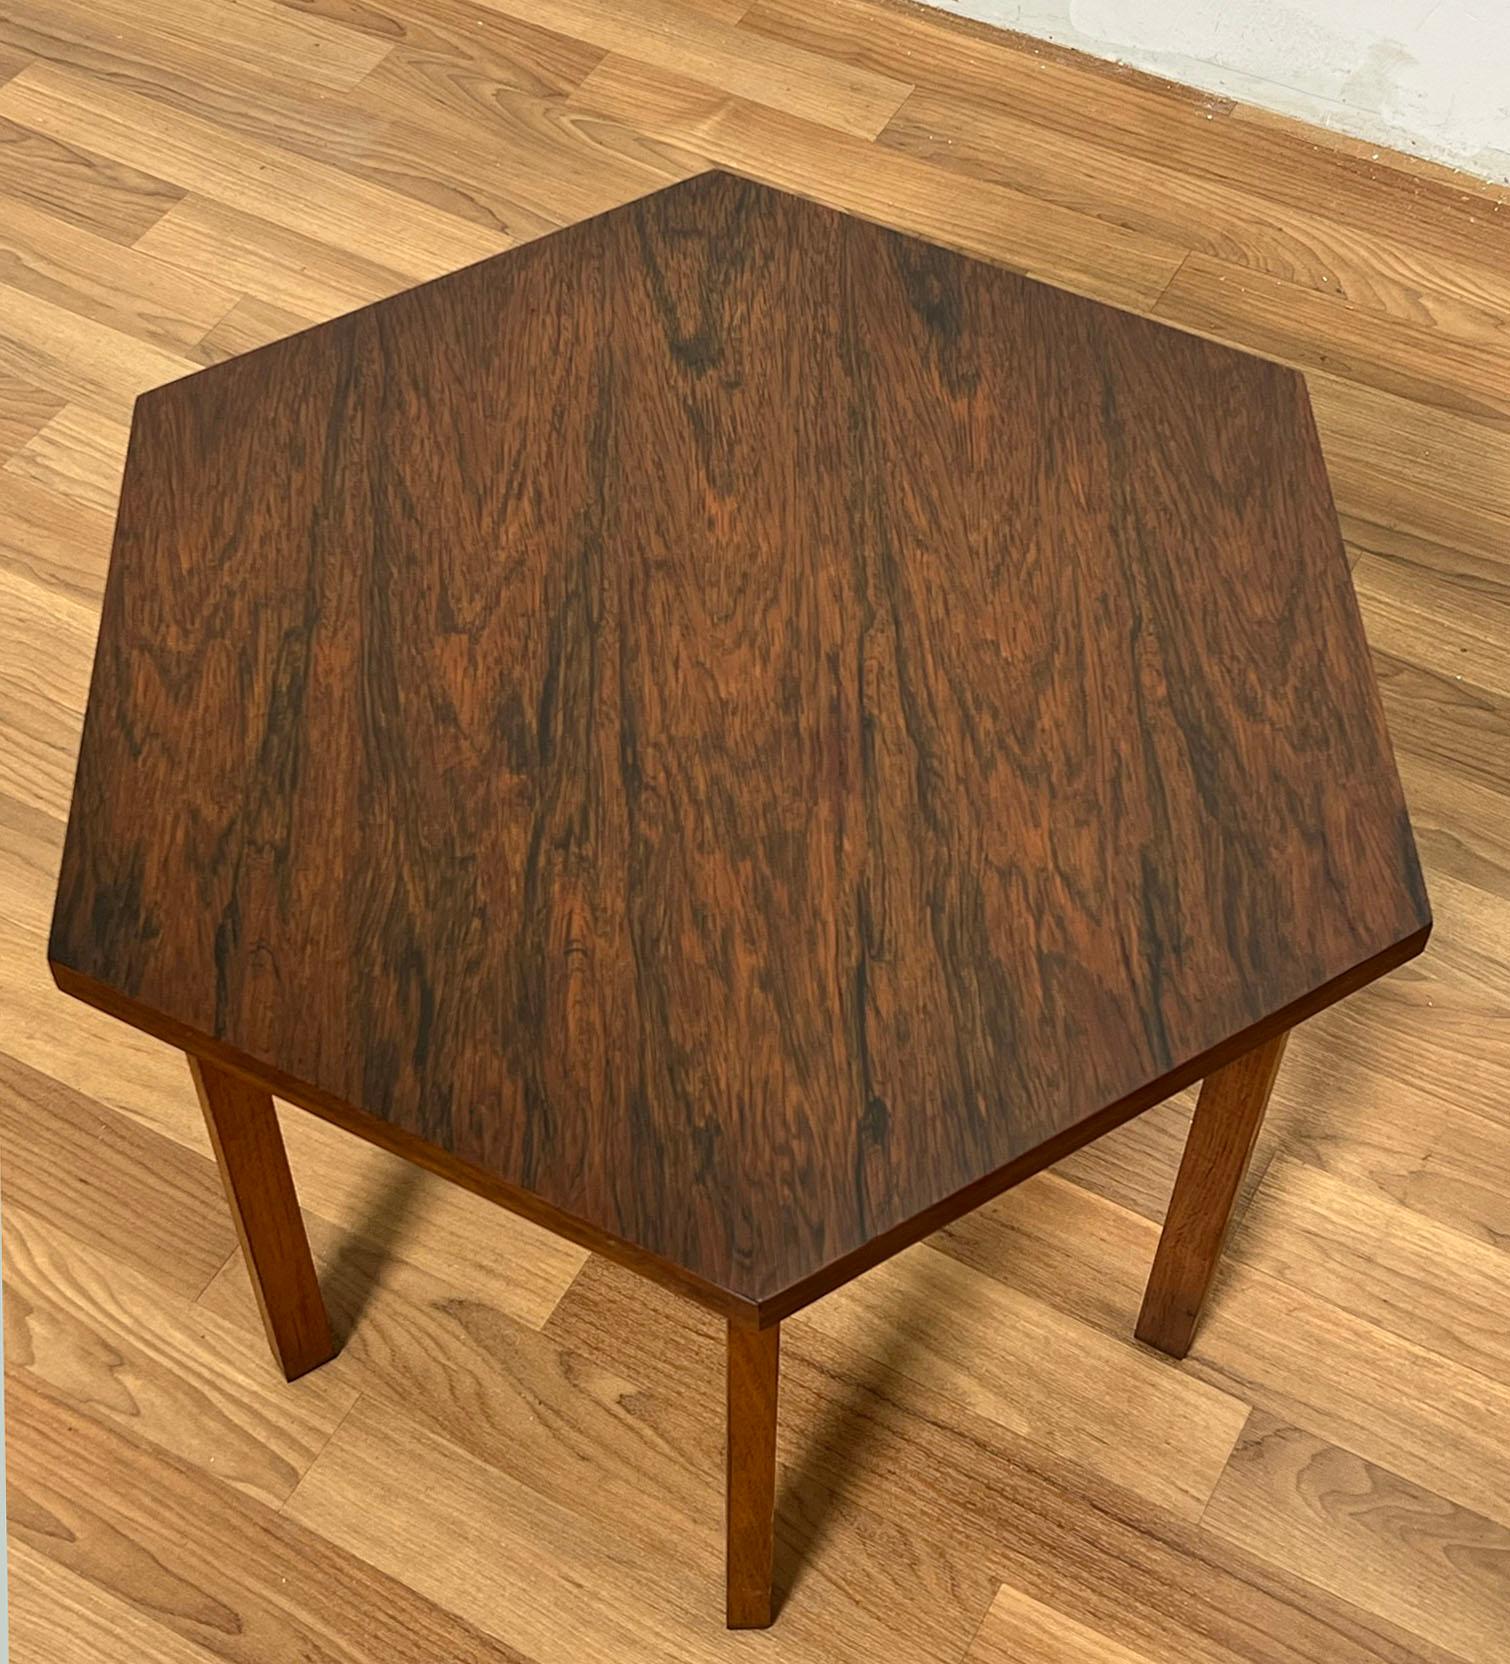 Hexagonal occasional table in rosewood designed by Paul McCobb for Lane's Delineator line, circa 1960s.